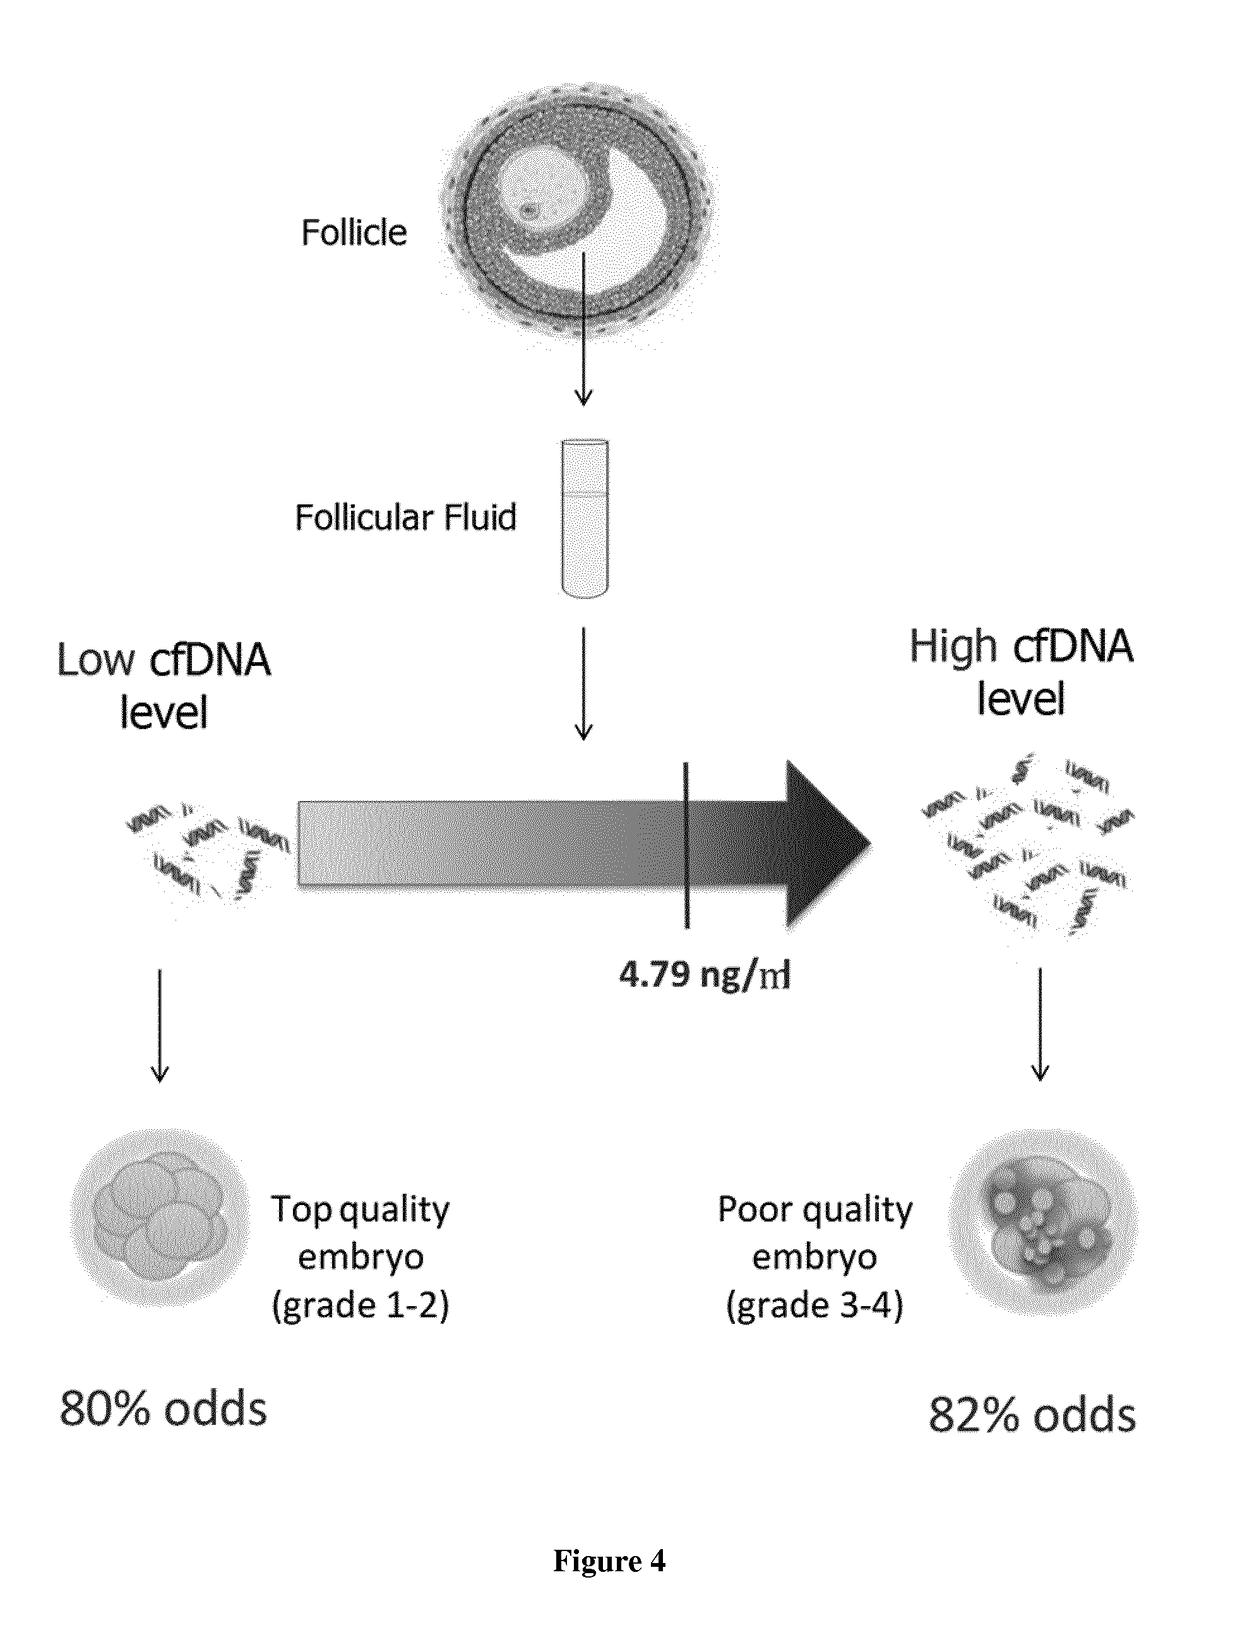 Free nucleic acids and mirna as non-invasive method for determining embryo quality